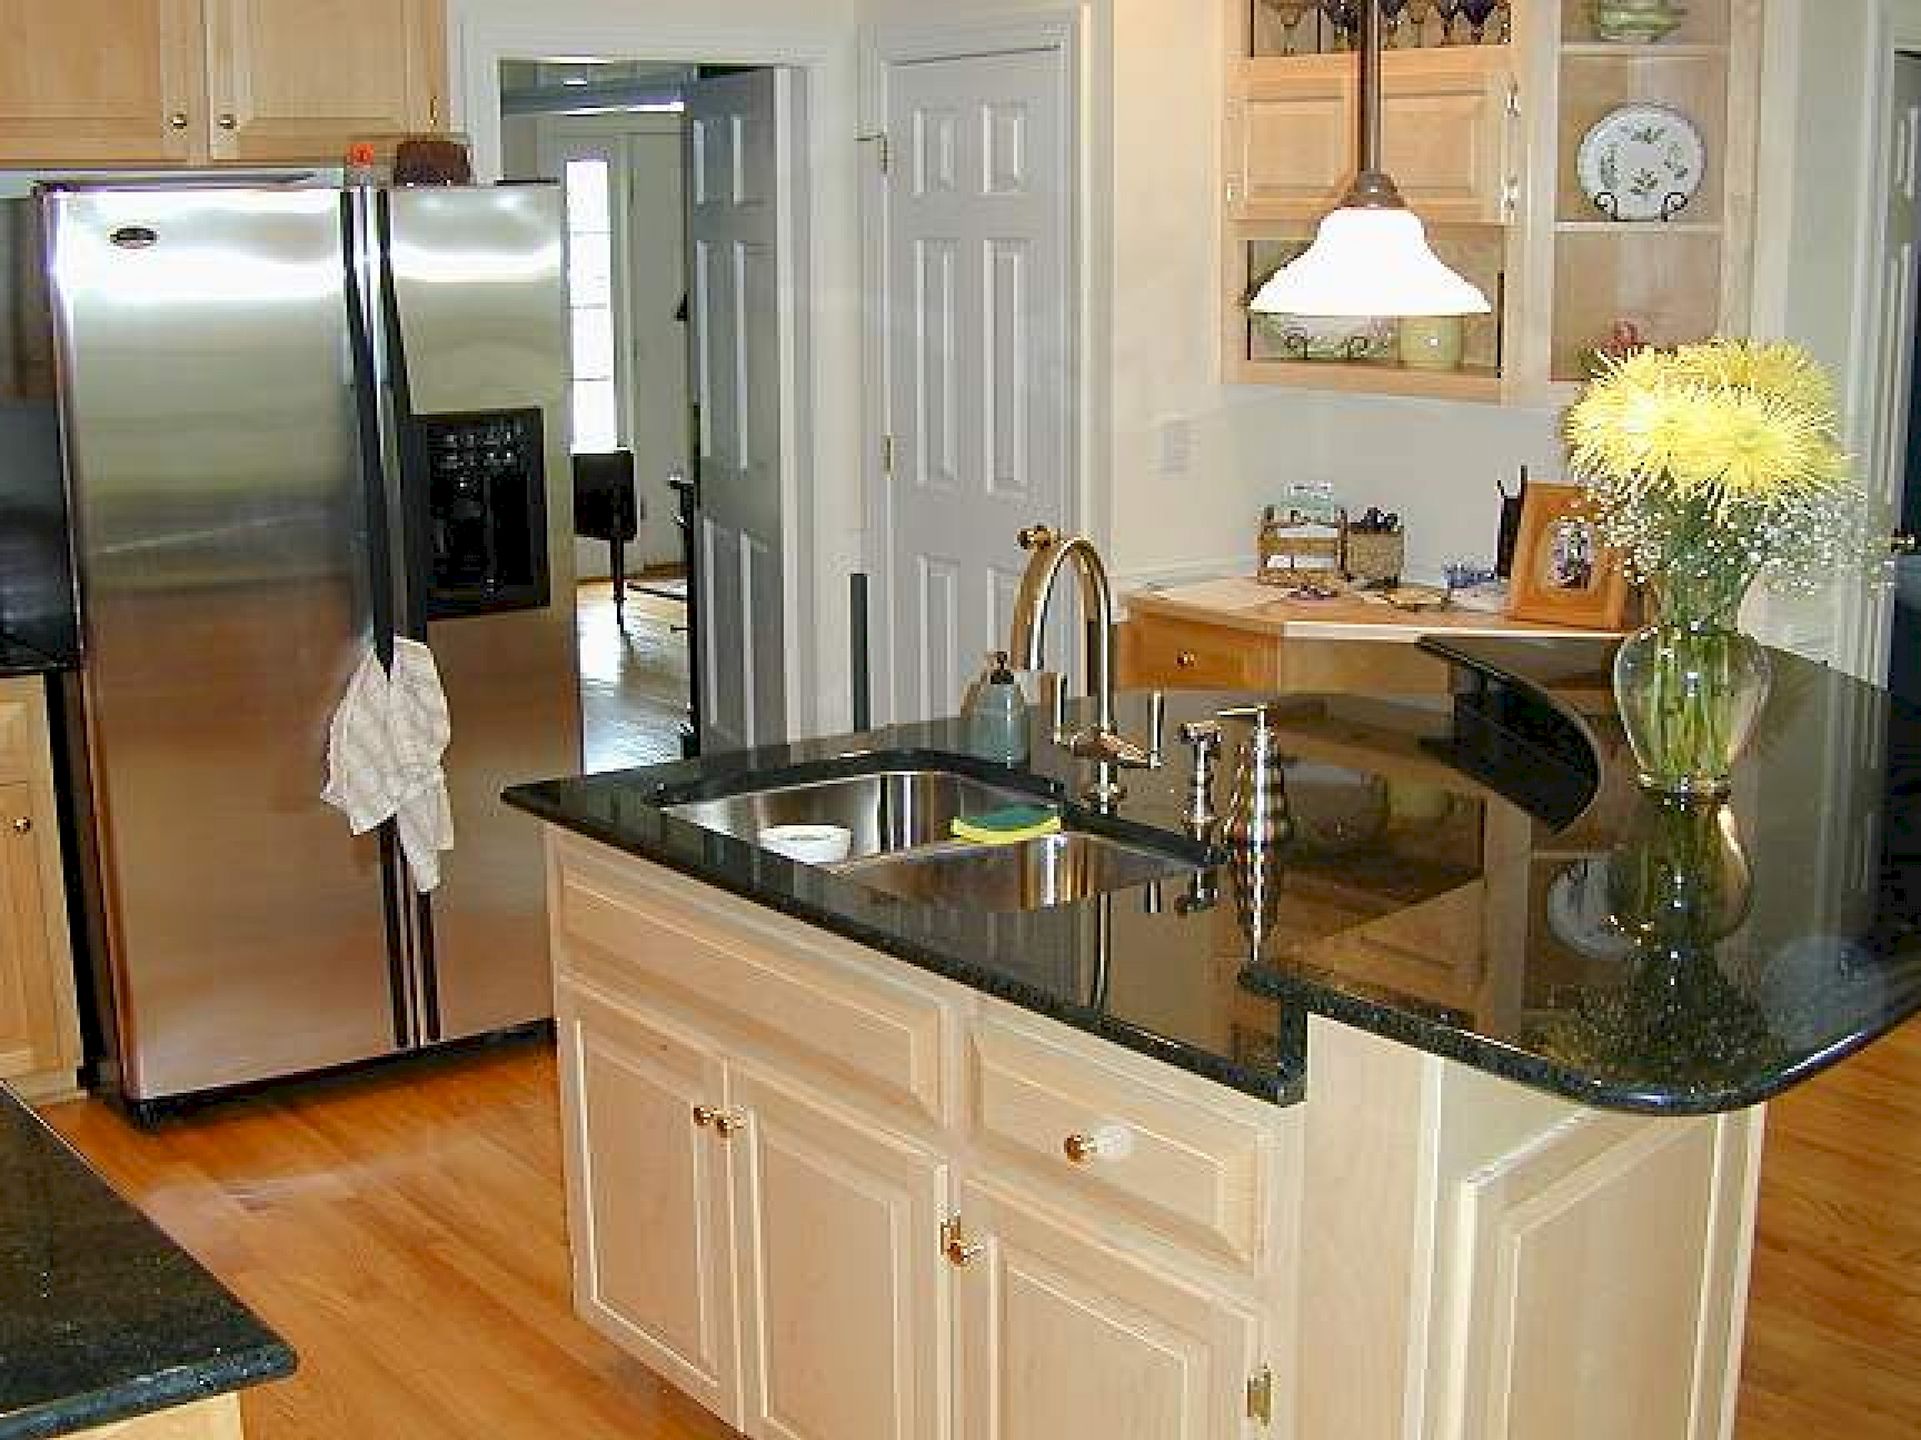 Black Kitchen Island With Seating photo - 2